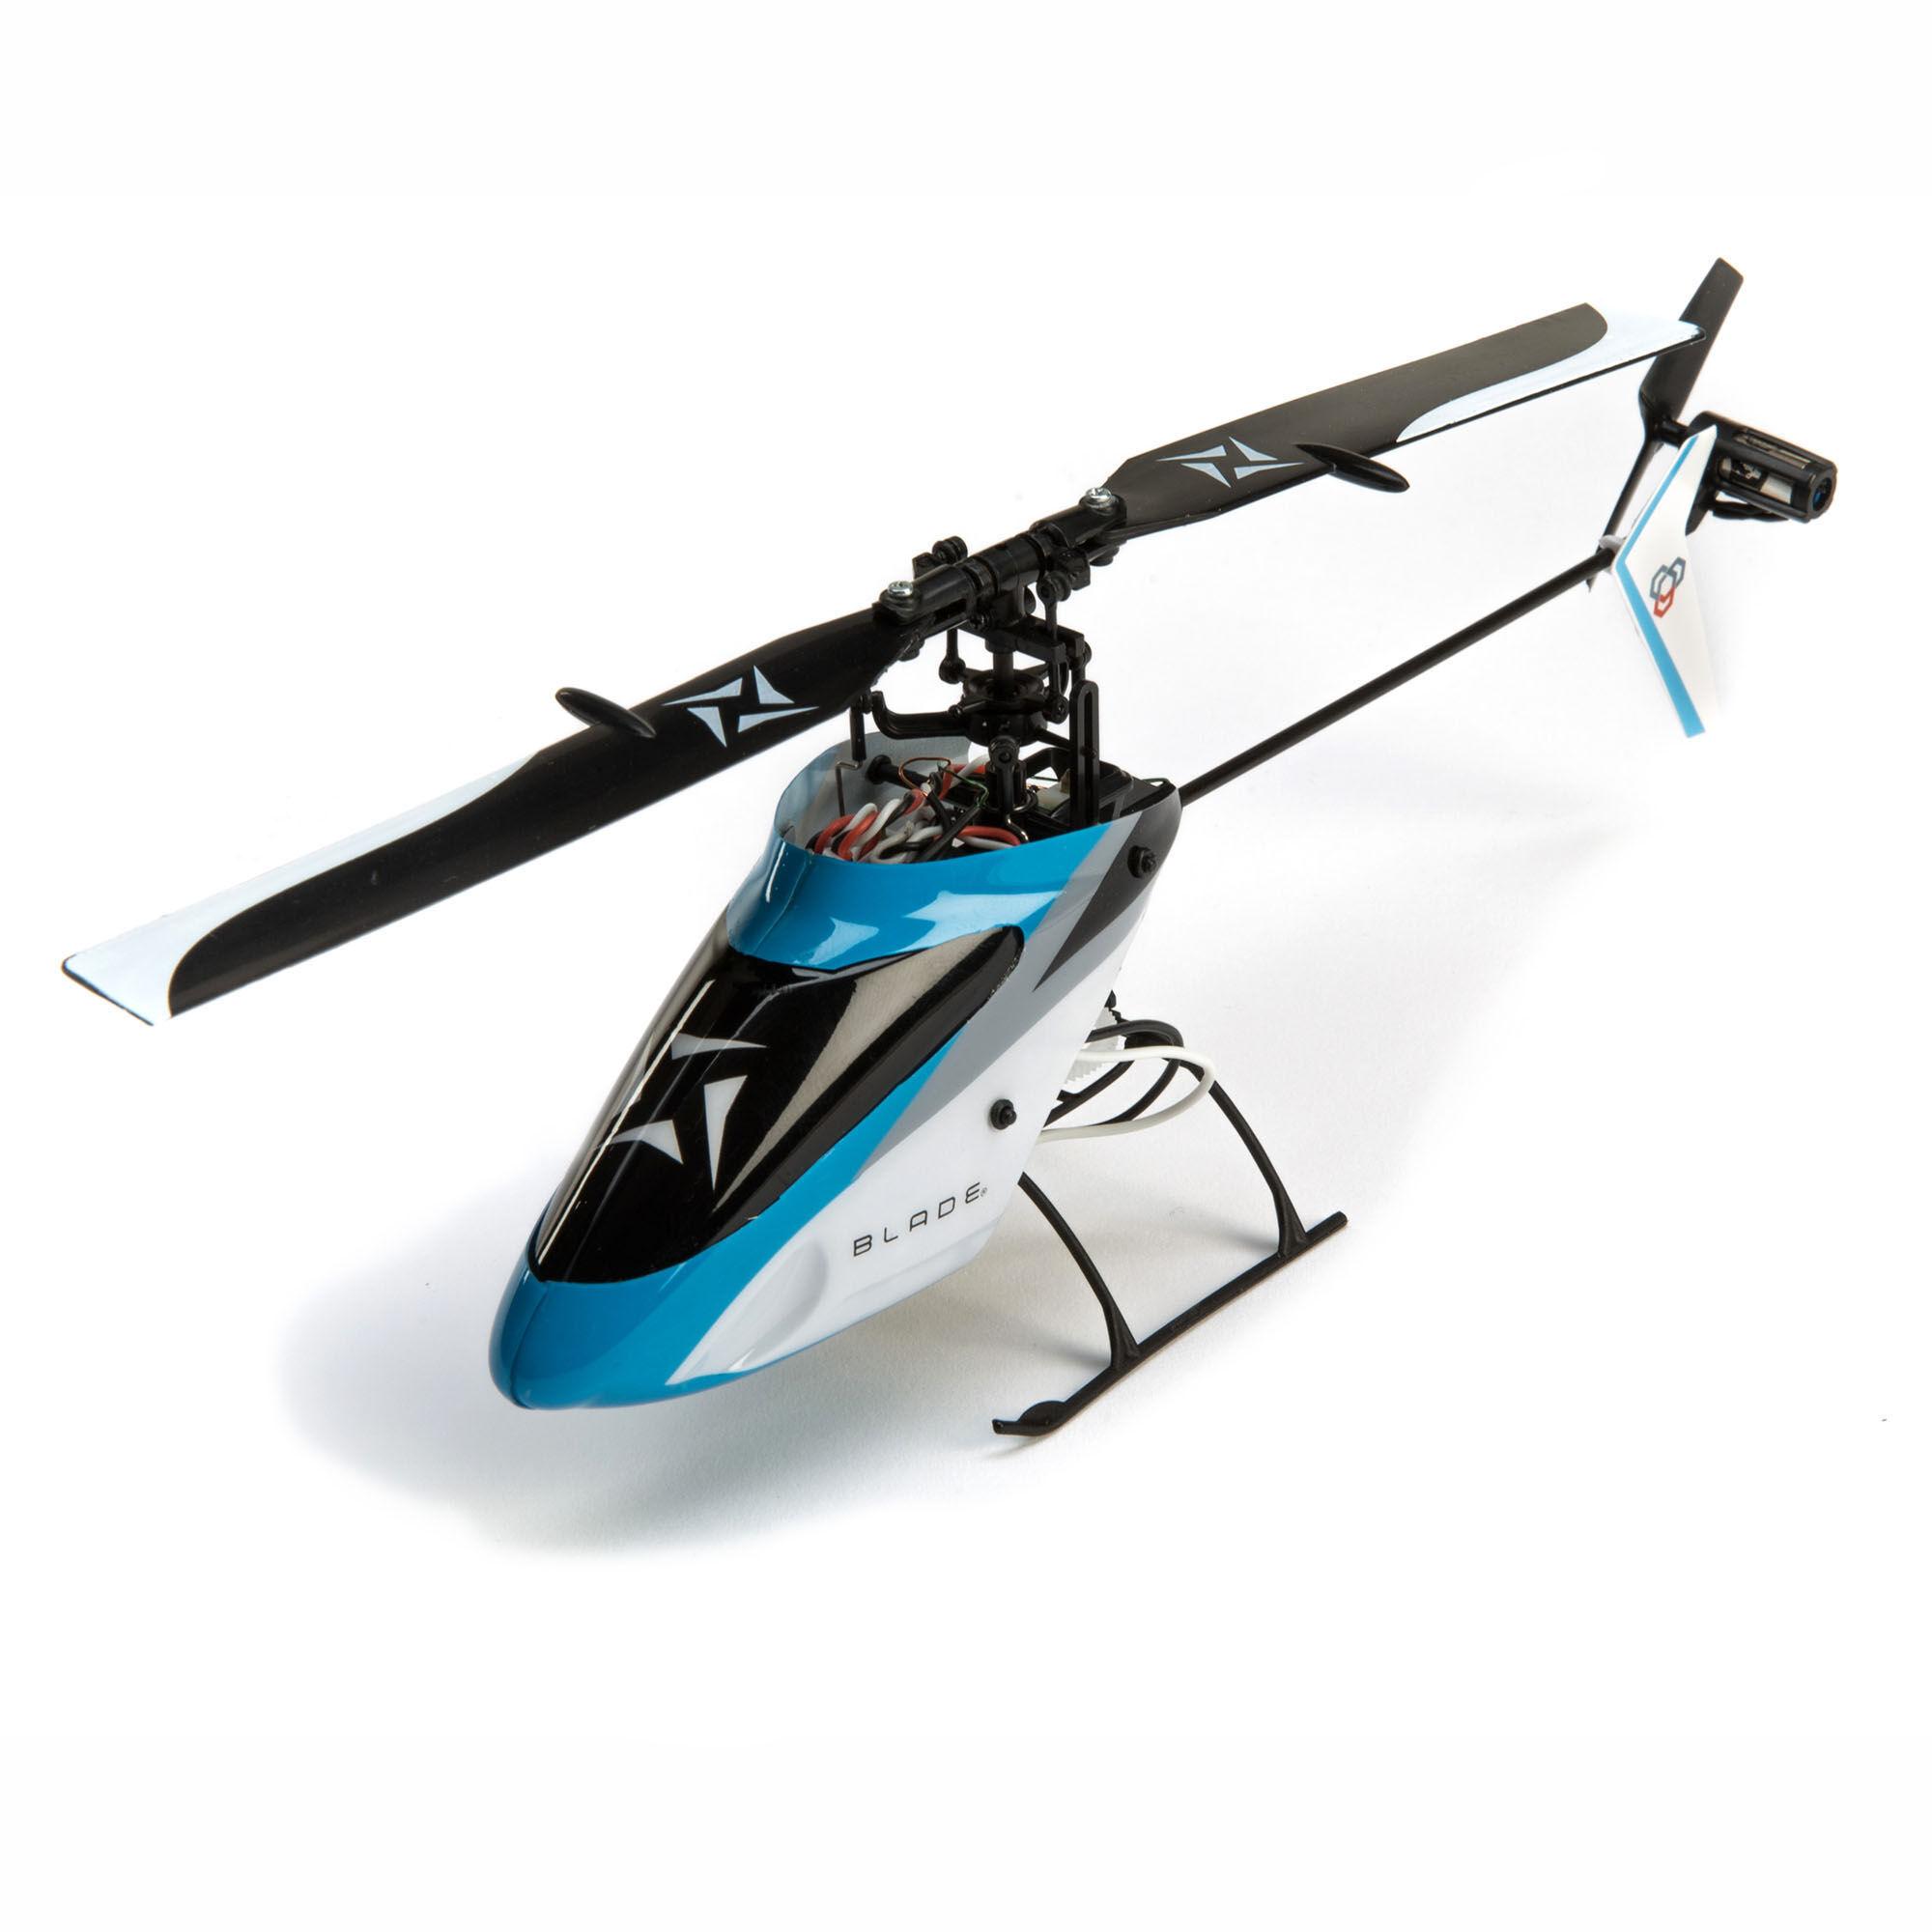 Tower Hobbies Helicopters:  Customer Satisfaction and Quality: Tower Hobbies Helicopters